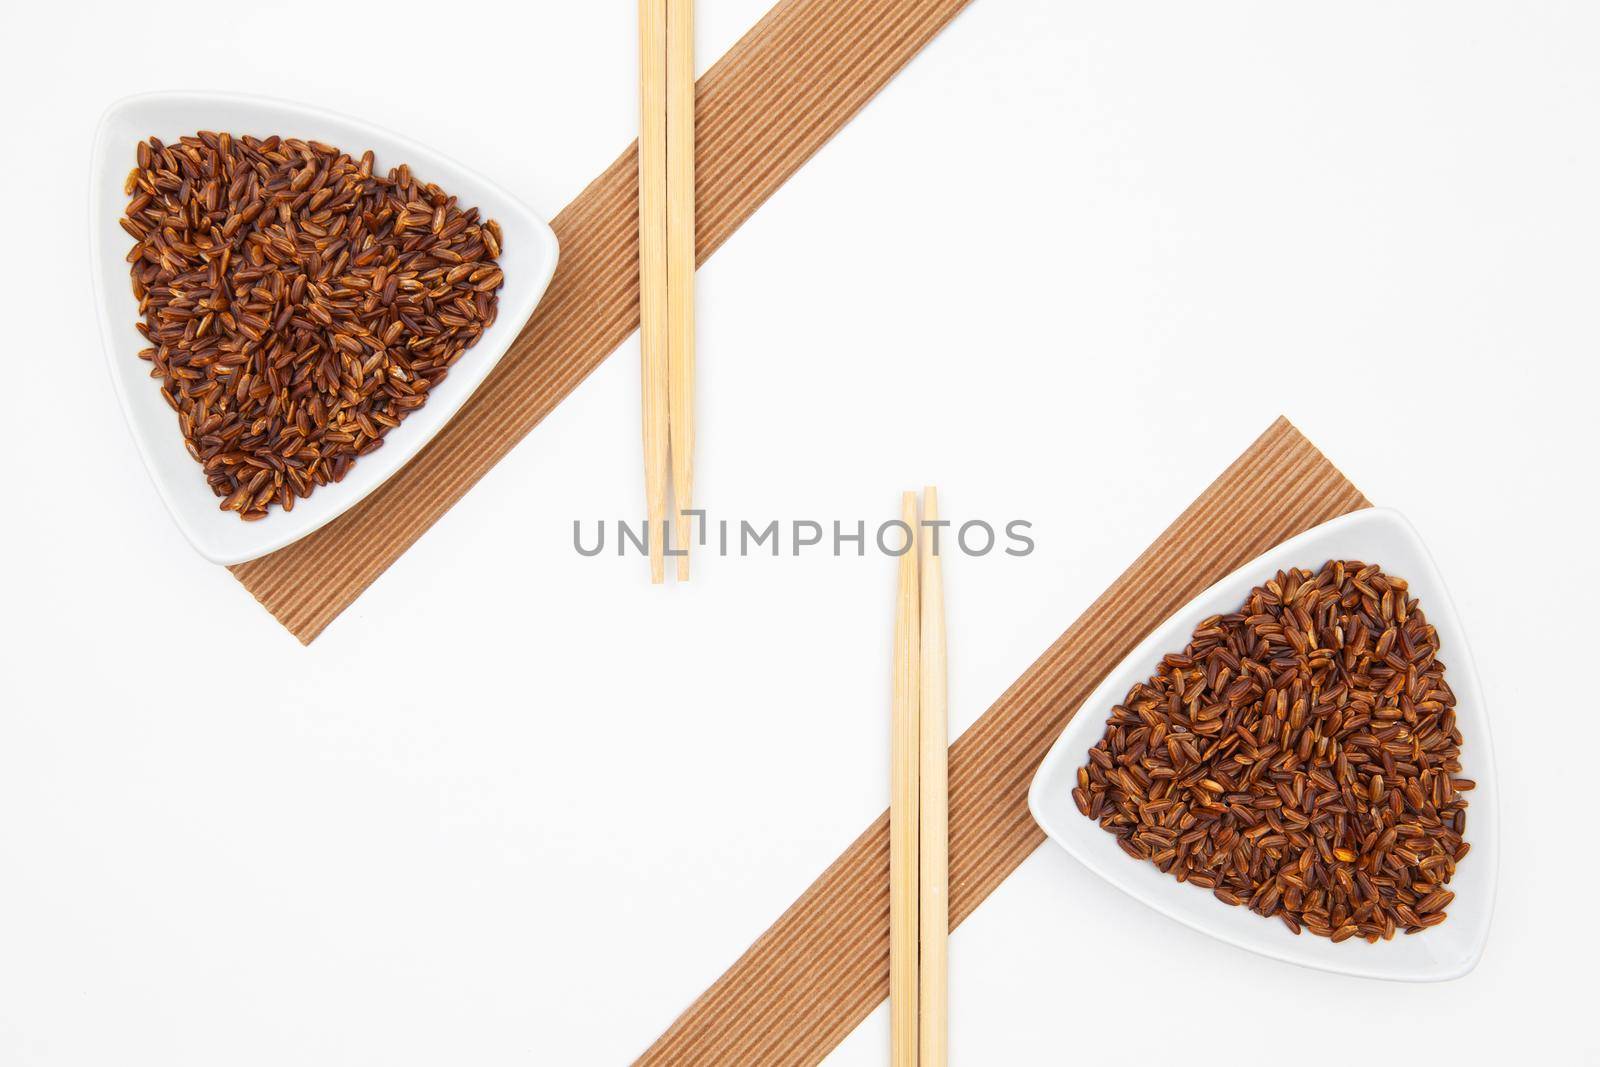 Top View Of White Sushi Plate With Rise And Chopsticks.  by CaptureLight